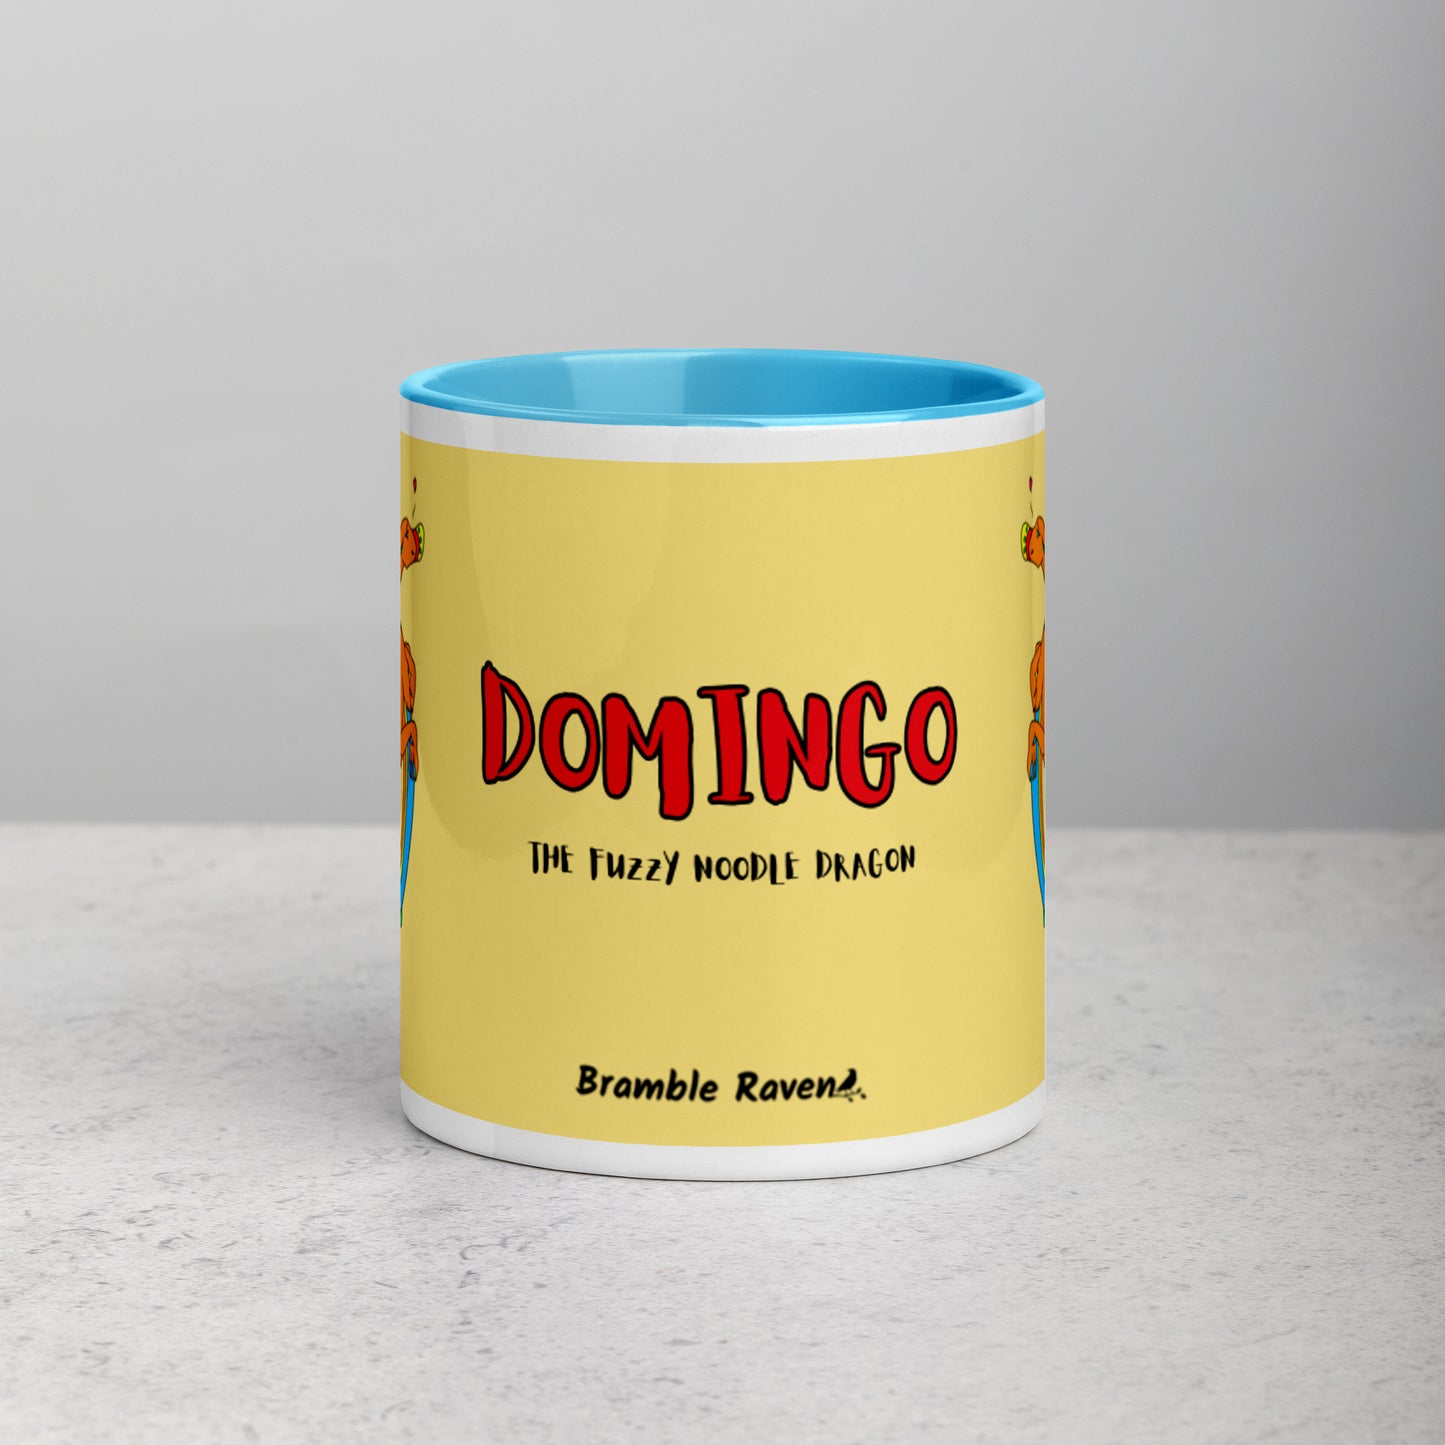 11 ounce white ceramic mug featuring a double-sided image of Domingo the Fuzzy Noodle Dragon against a light yellow background. Blue inside and handle color. Shown on tabletop. Front view shows Domingo the Fuzzy Noodle Dragon text and Bramble Raven logo.